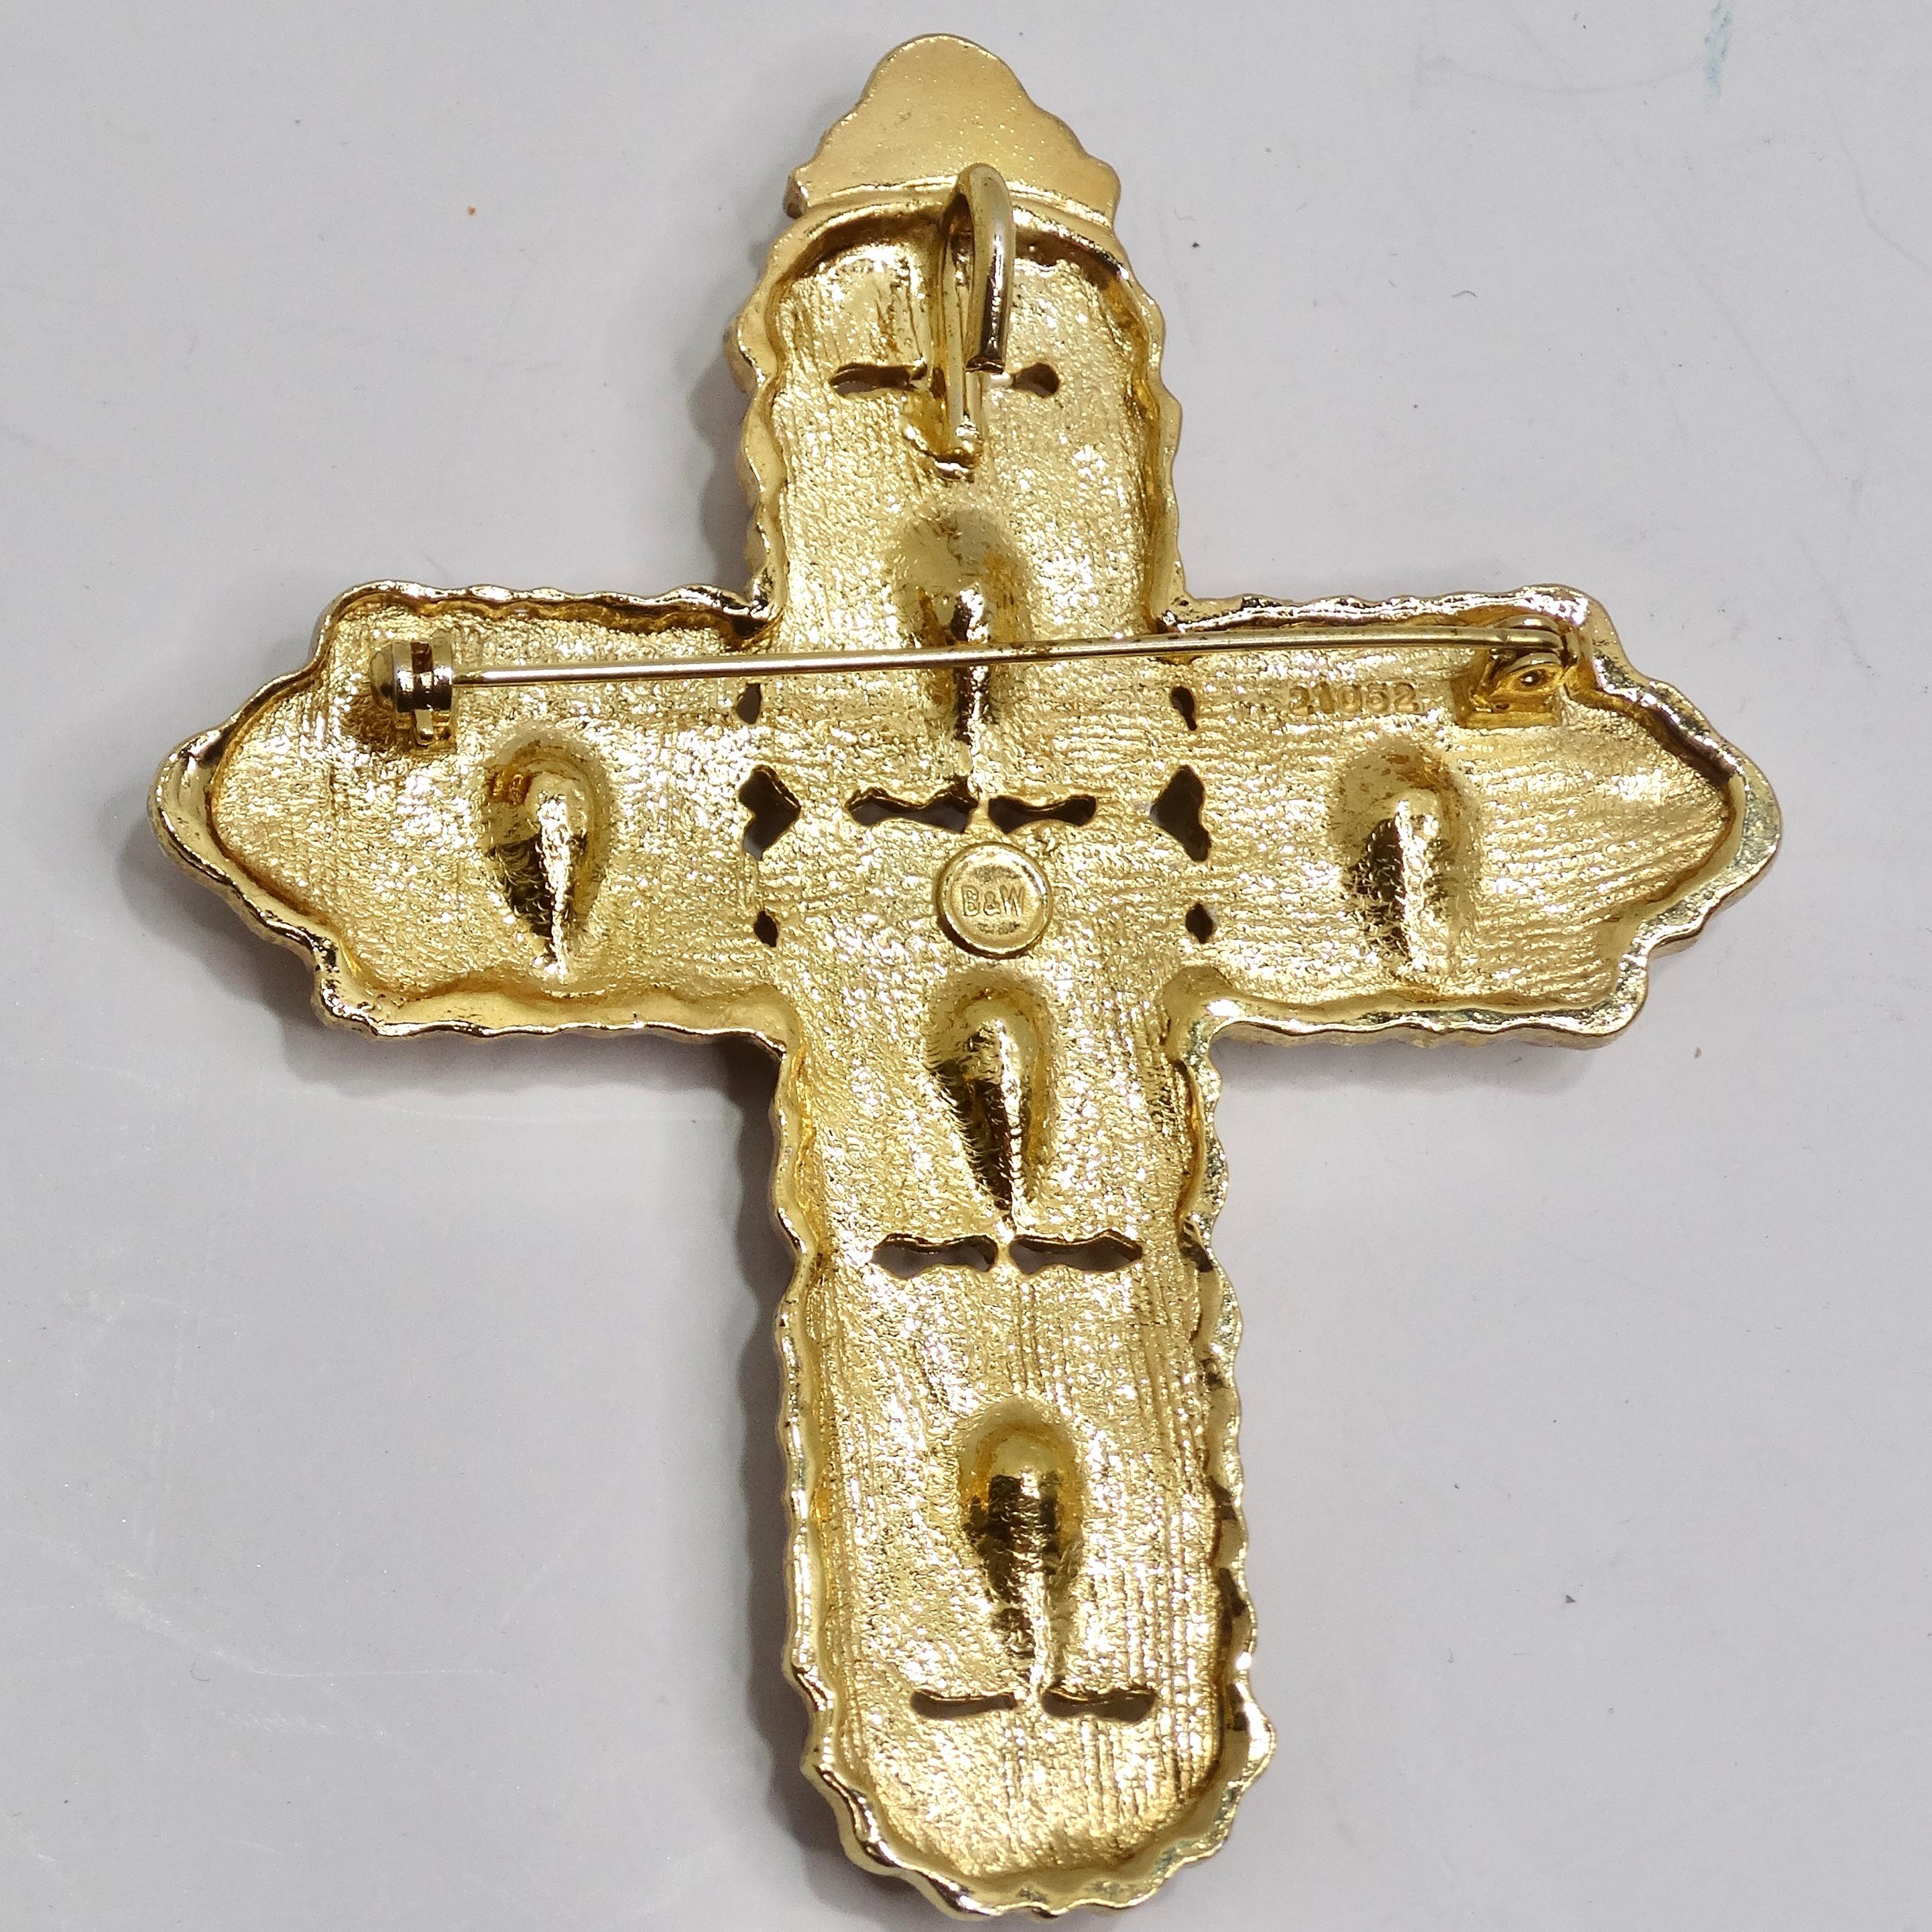 Butler & Wilson 1980s Gold Tone Black Stone Cross Brooch In Excellent Condition For Sale In Scottsdale, AZ